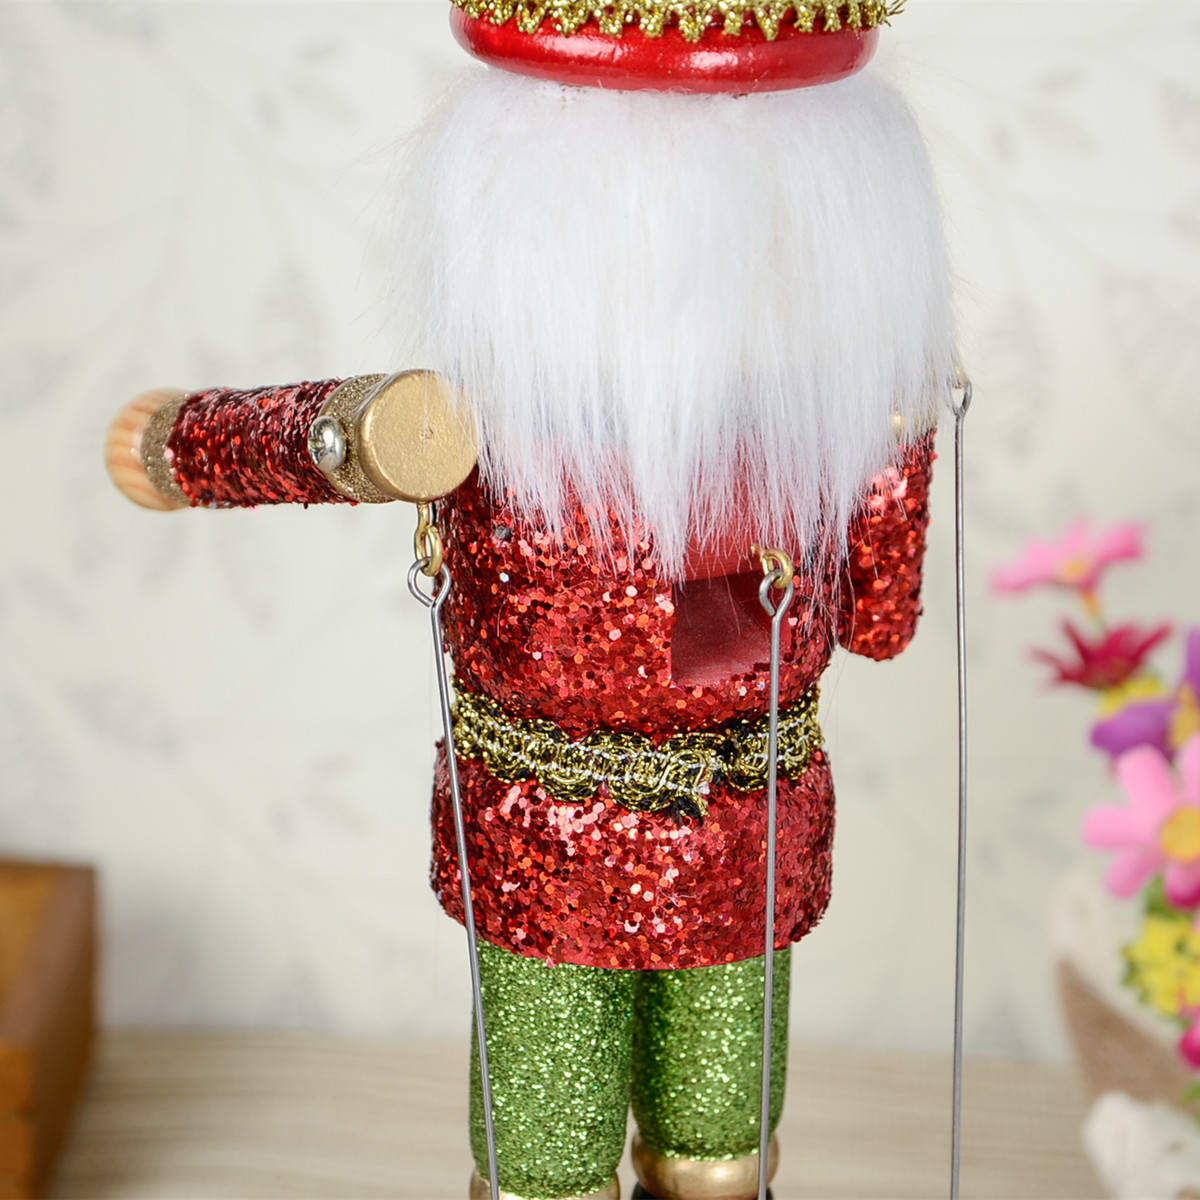 32cm-Wooden-Music-Box-Nutcracker-Doll-Soldier-Vintage-Handcraft-Decoration-Christmas-Gifts-1398446-5